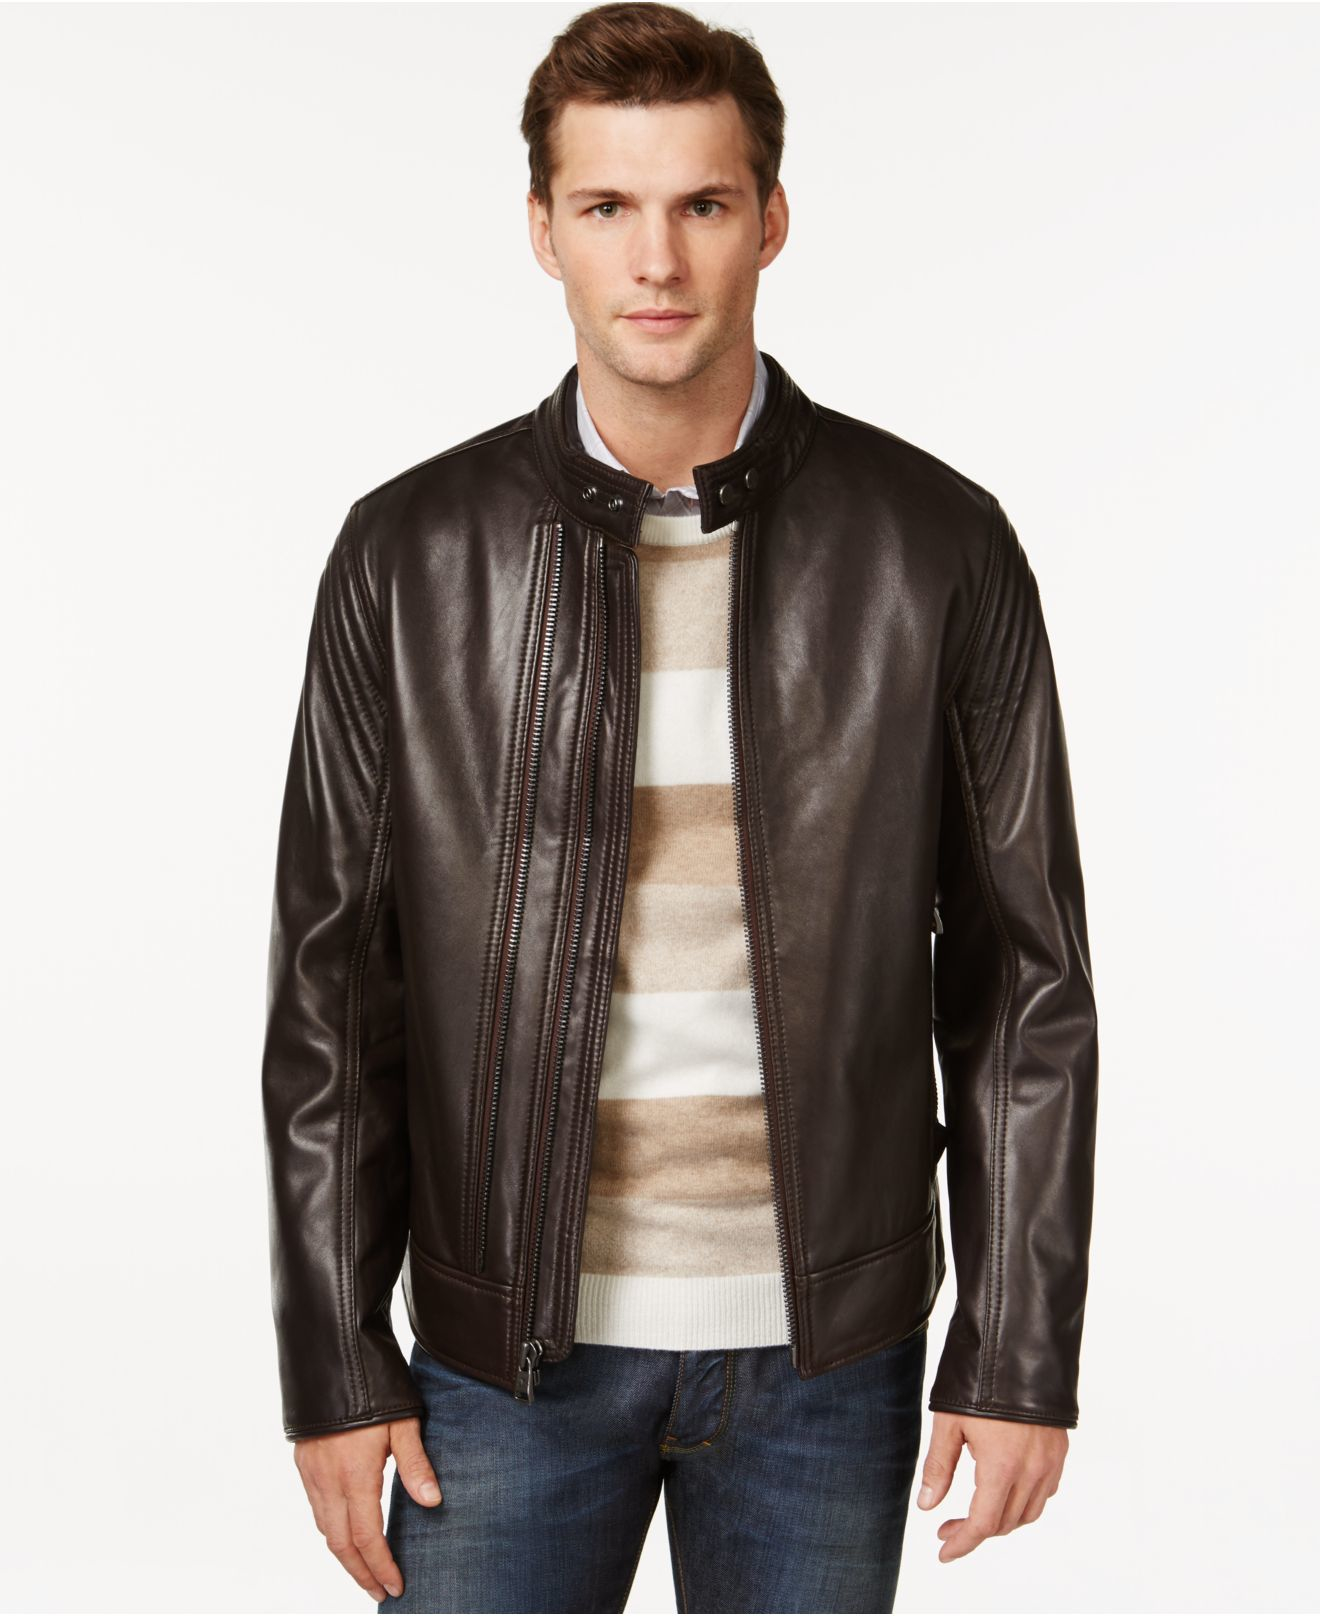 Lyst - Andrew Marc Windsor Leather Jacket in Brown for Men